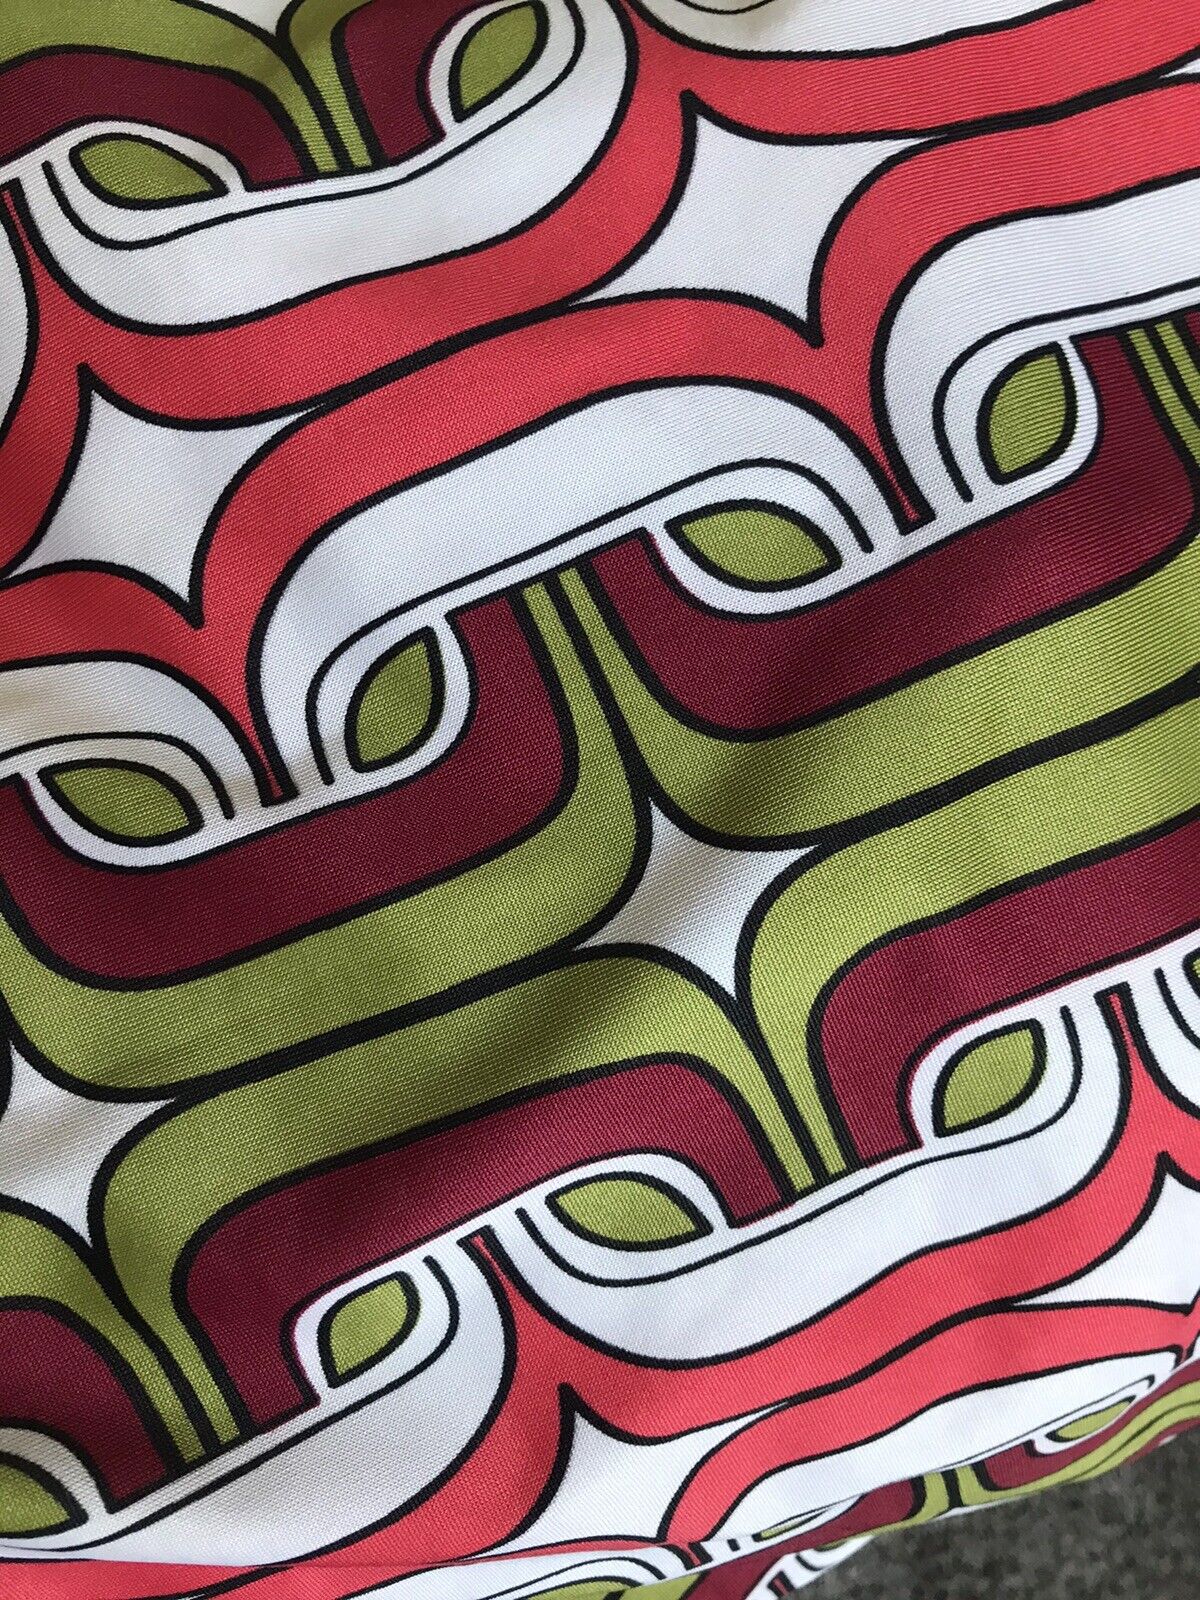 Vintage 60s 70s Jersey Fabric 